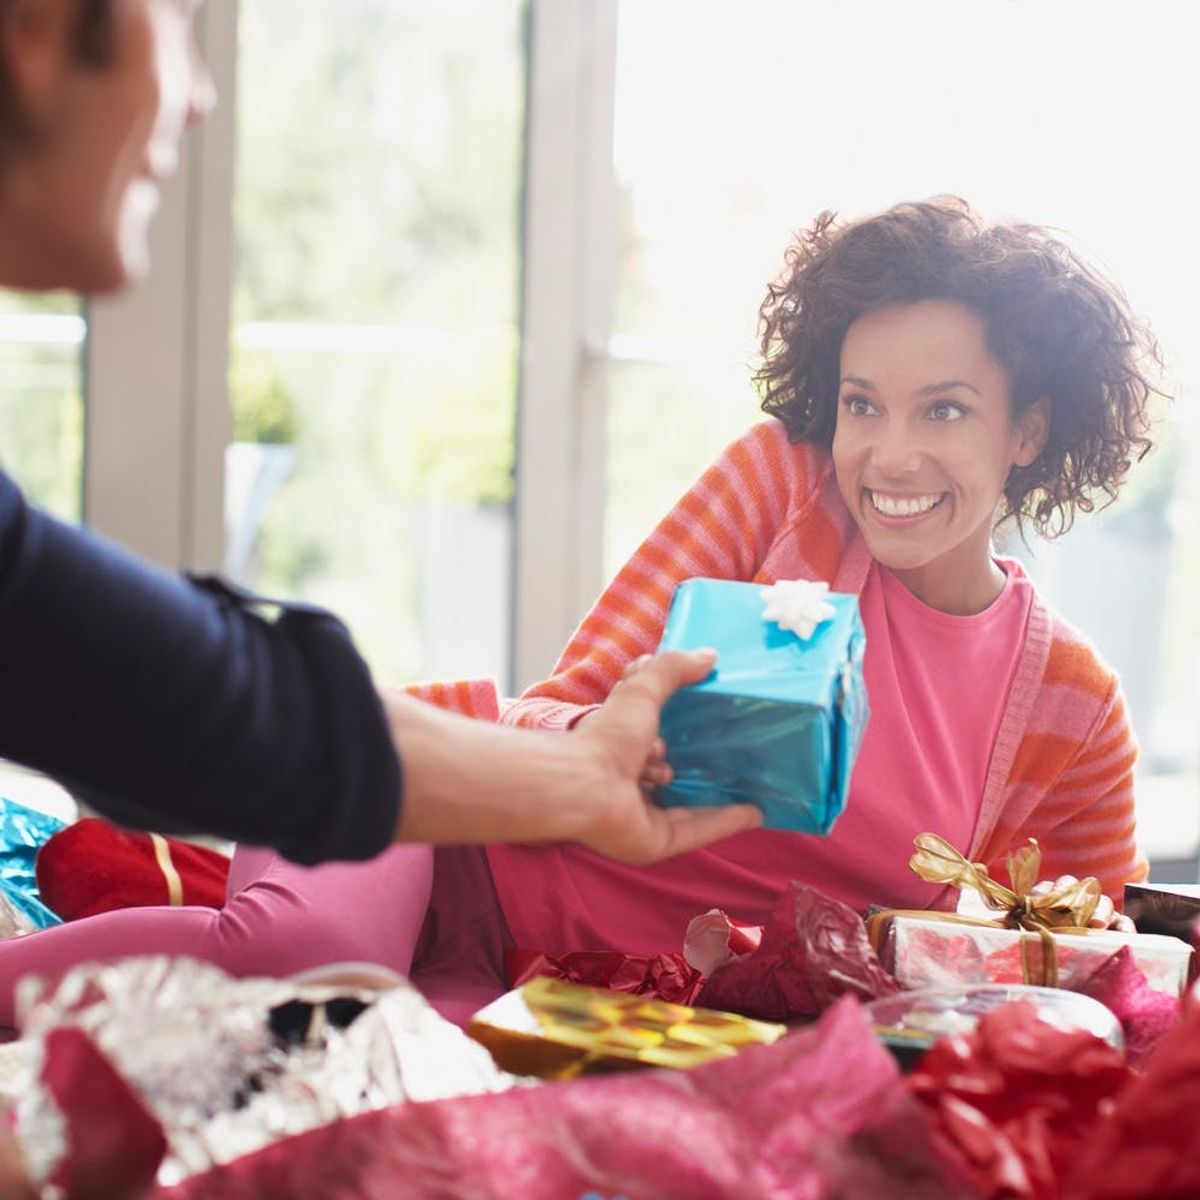 7 Things You Should Absolutely Not Buy for Your S.O. This Holiday Season